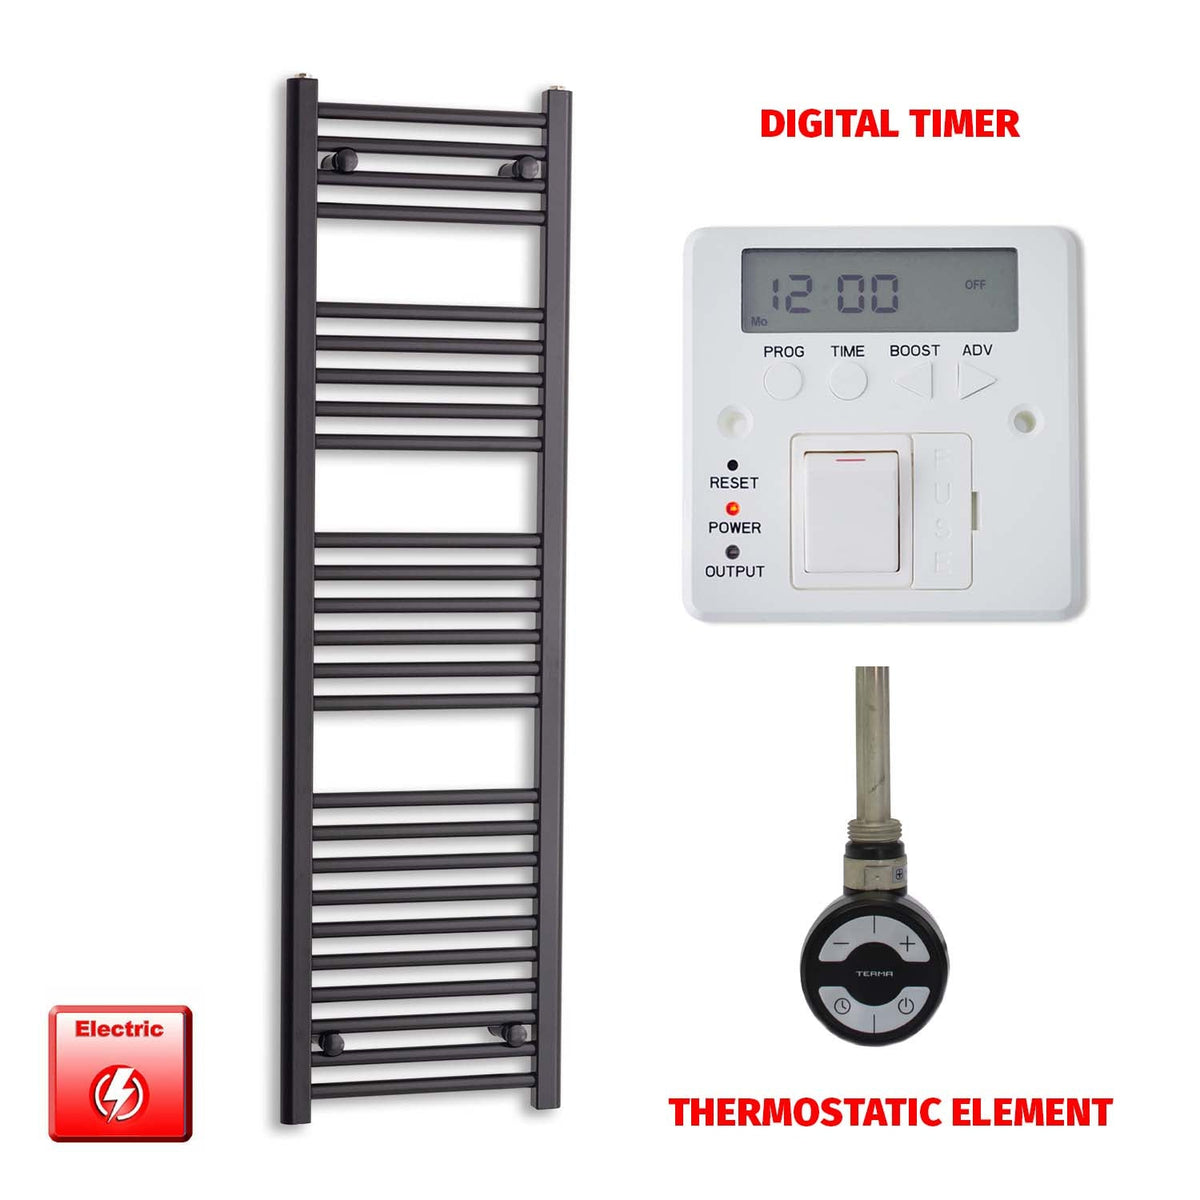 1400 x 450 Flat Black Pre-Filled Electric Heated Towel Radiator HTR MOA Thermostatic Digital Timer